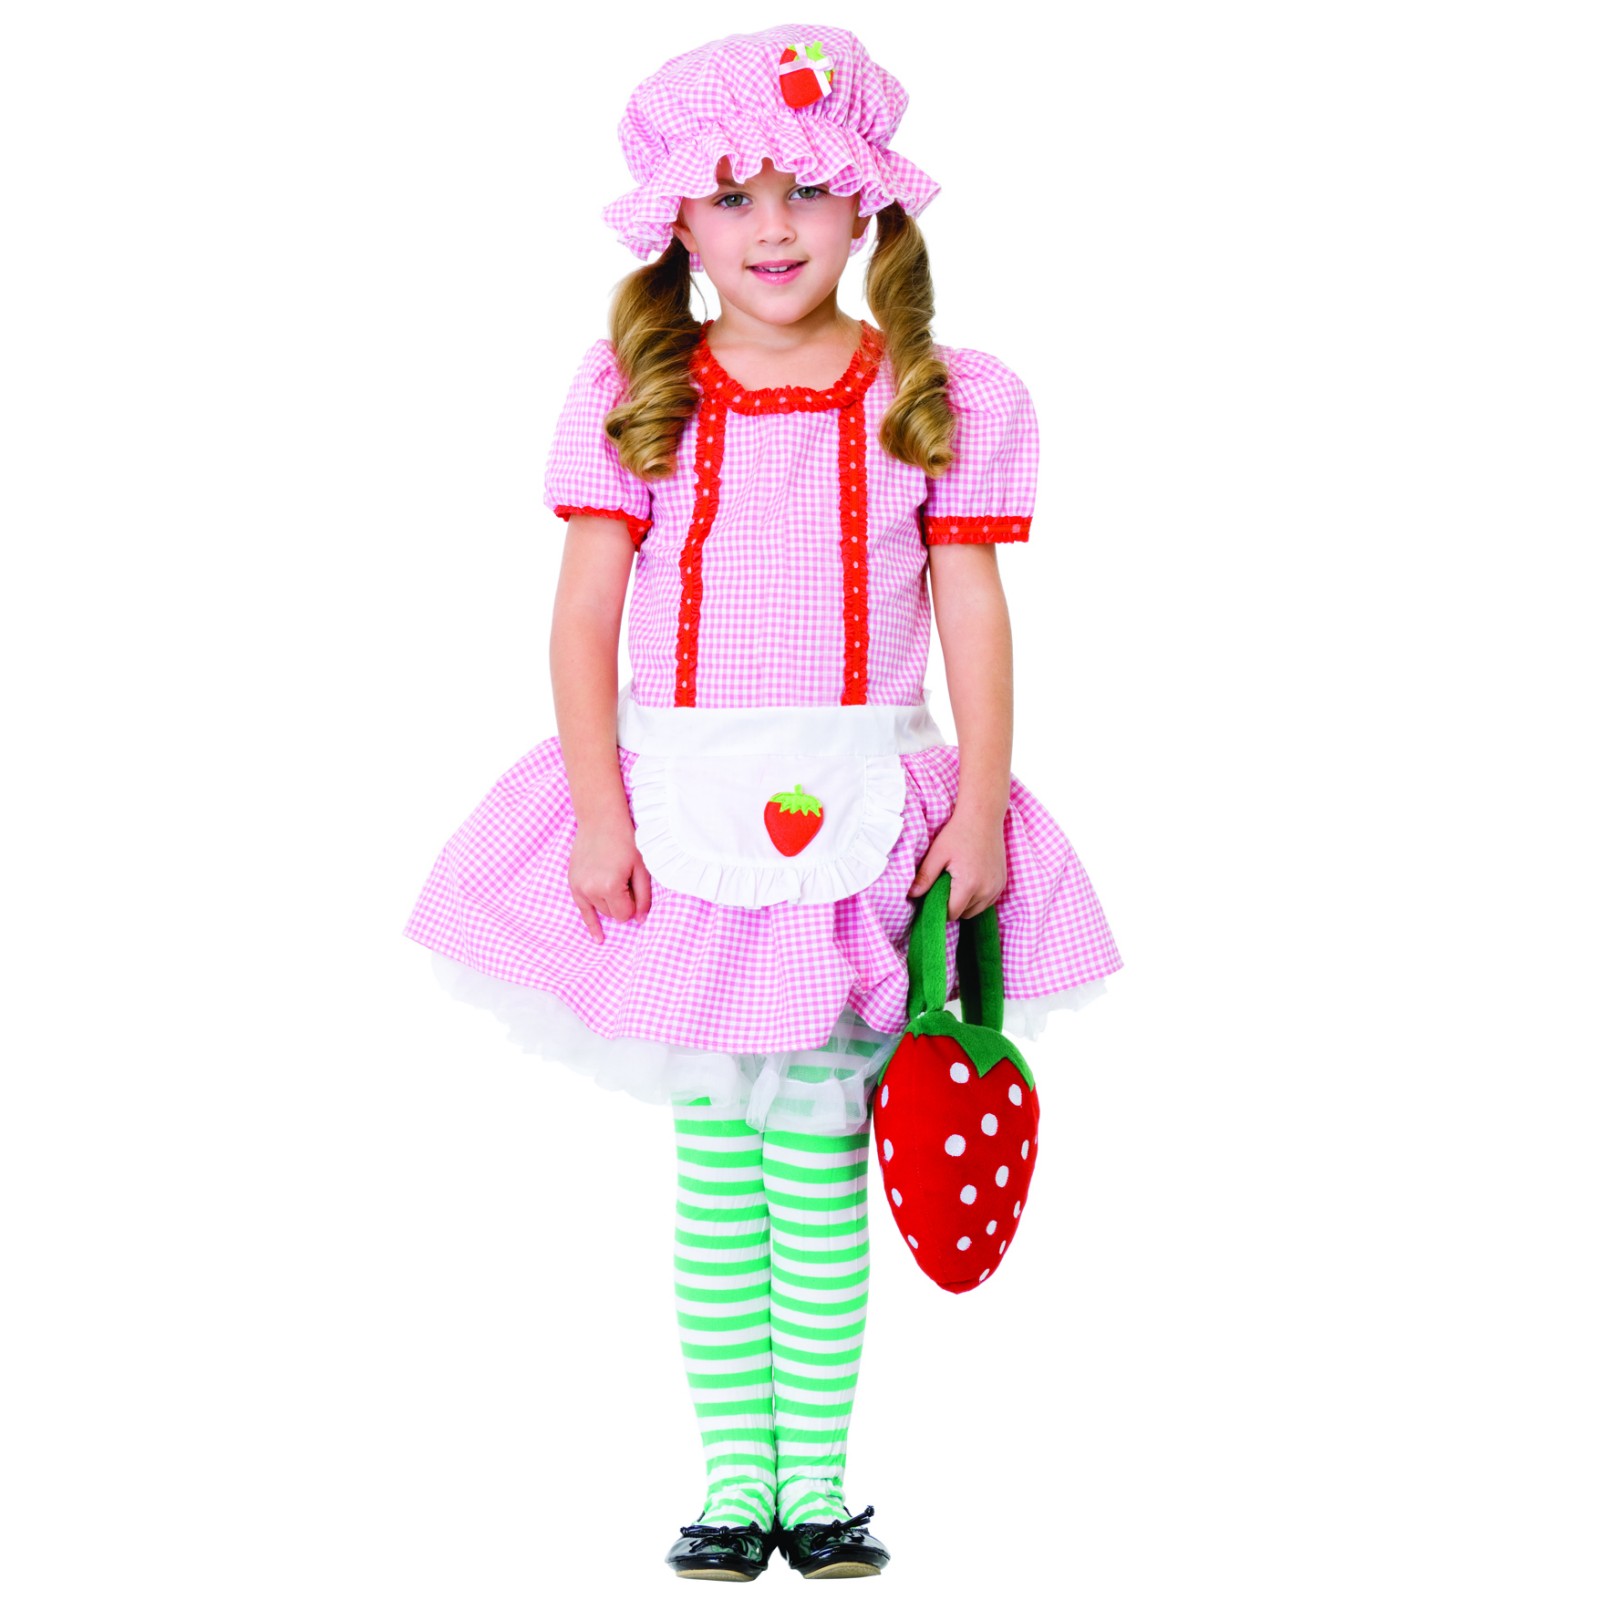 An authentic Strawberry Shortcake costume